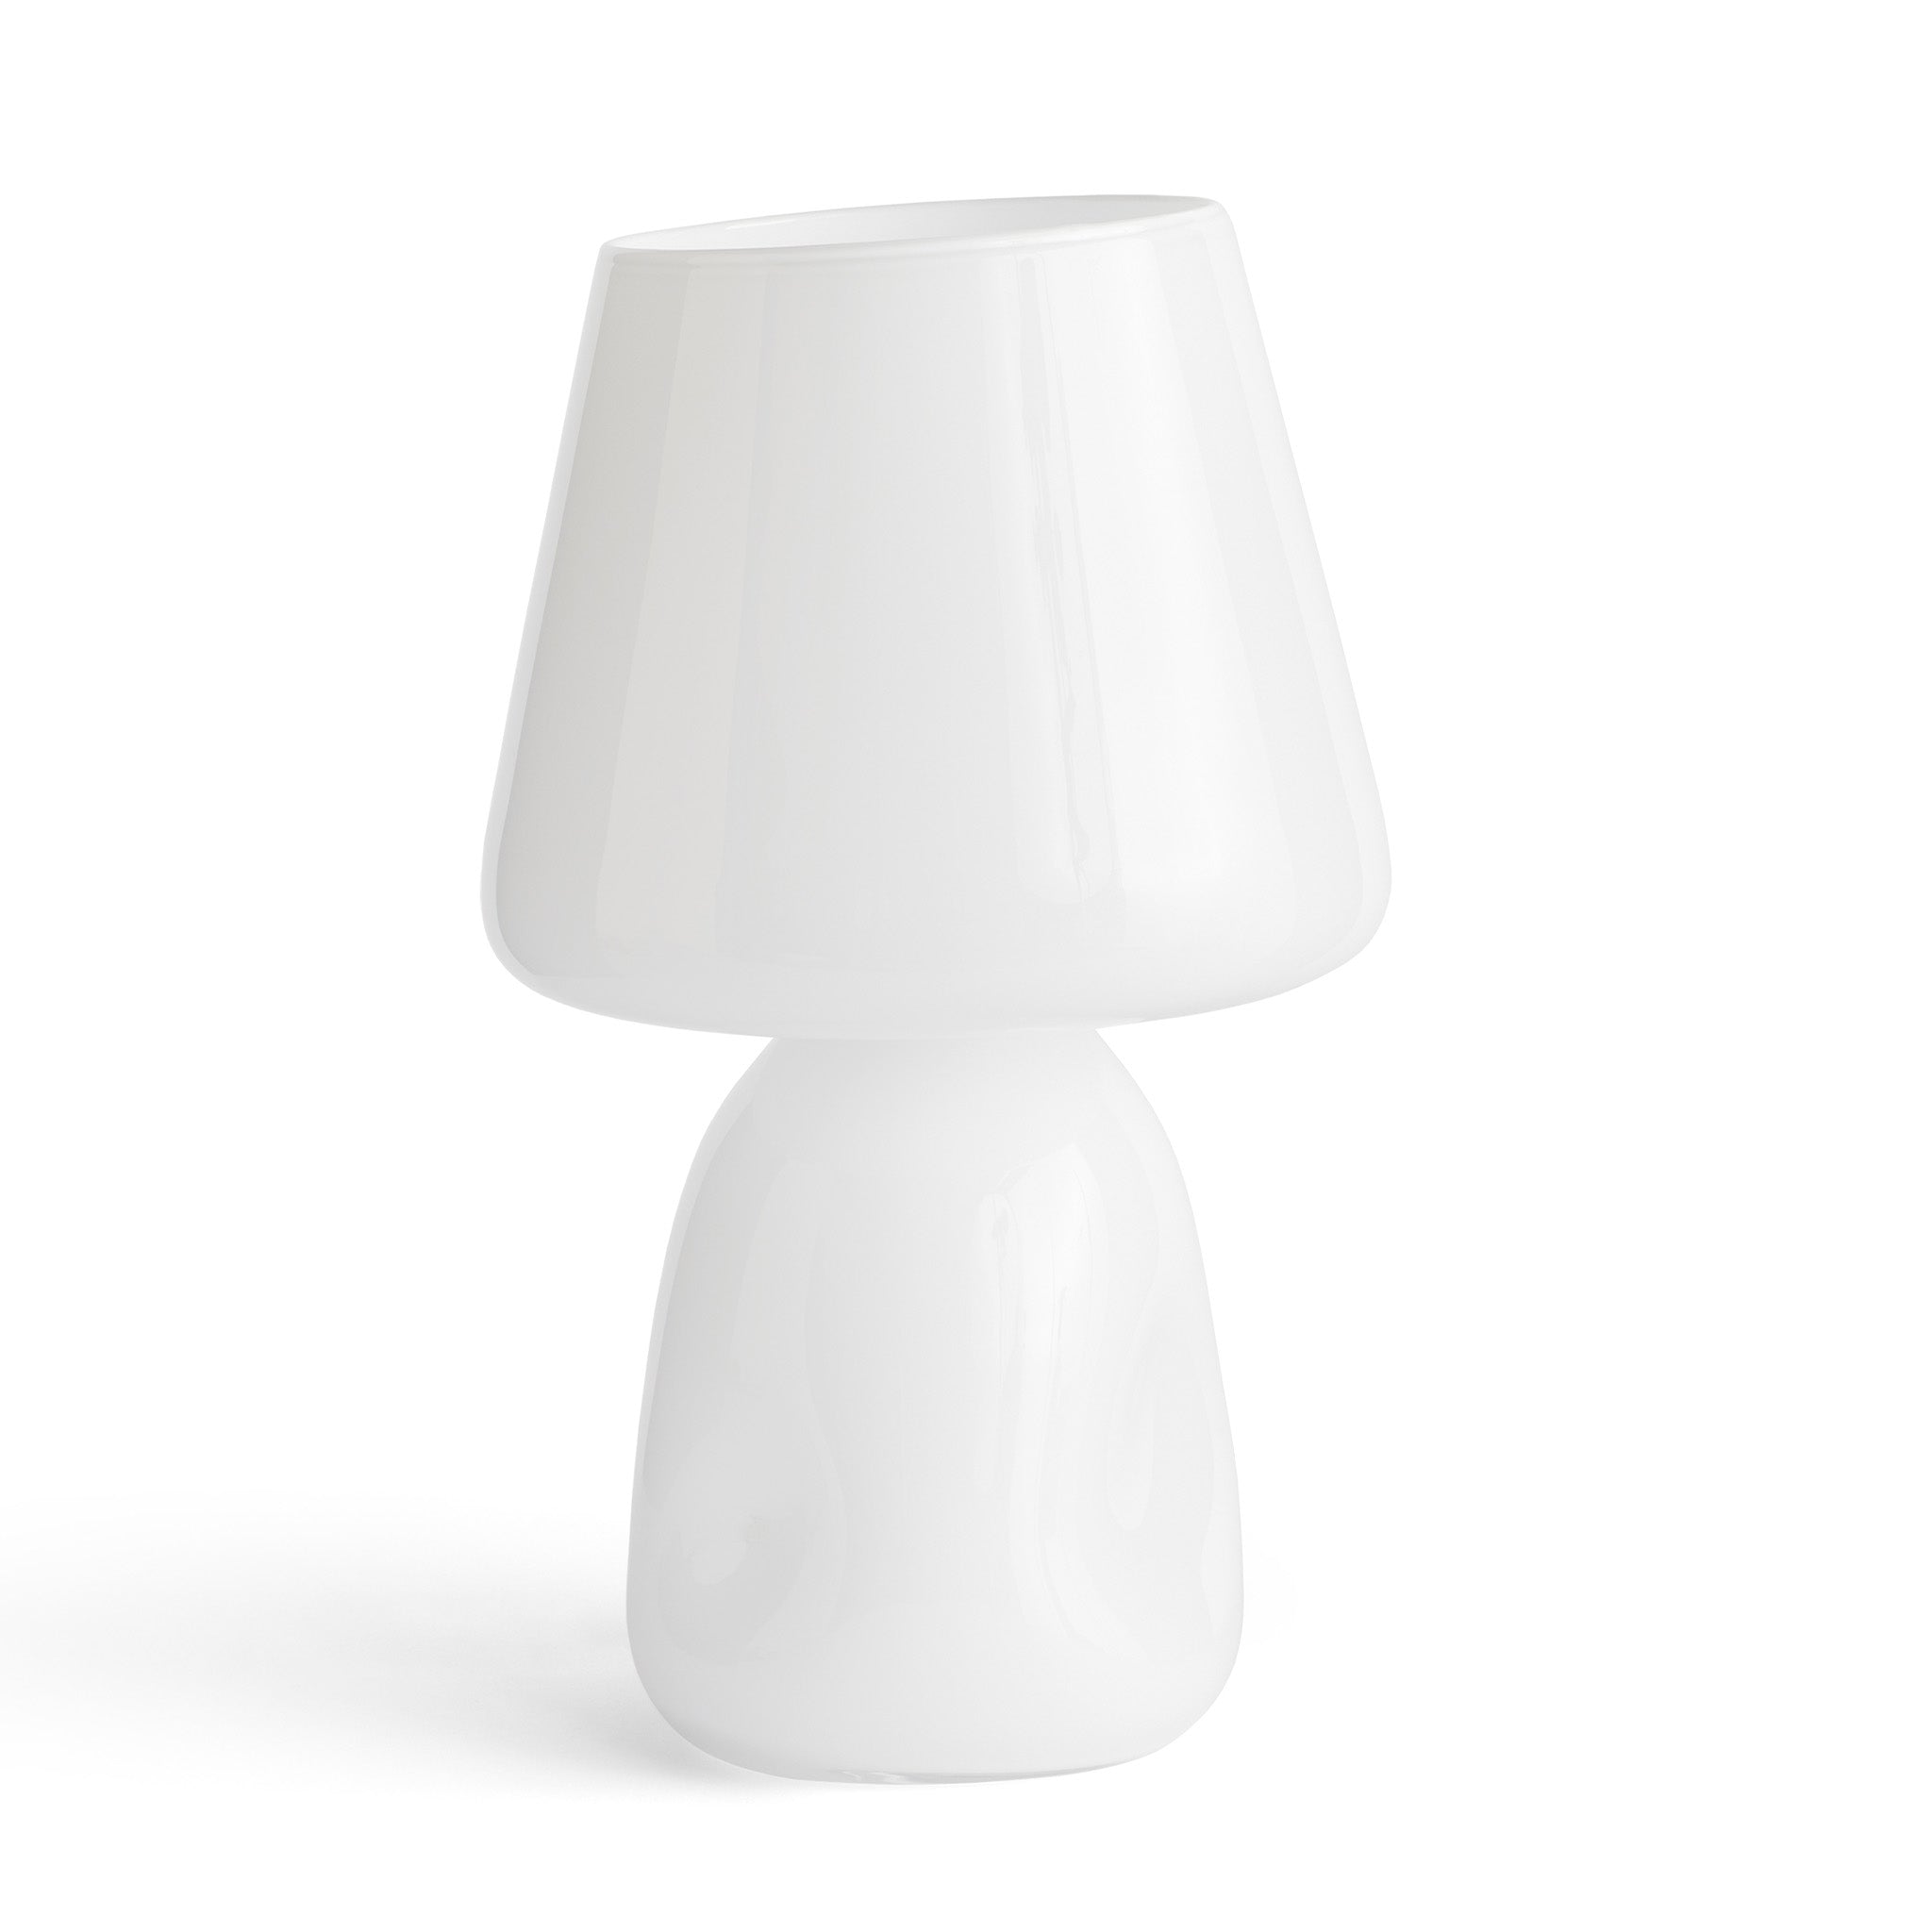 Apollo Table Lamp By Studio 0405 for Hay